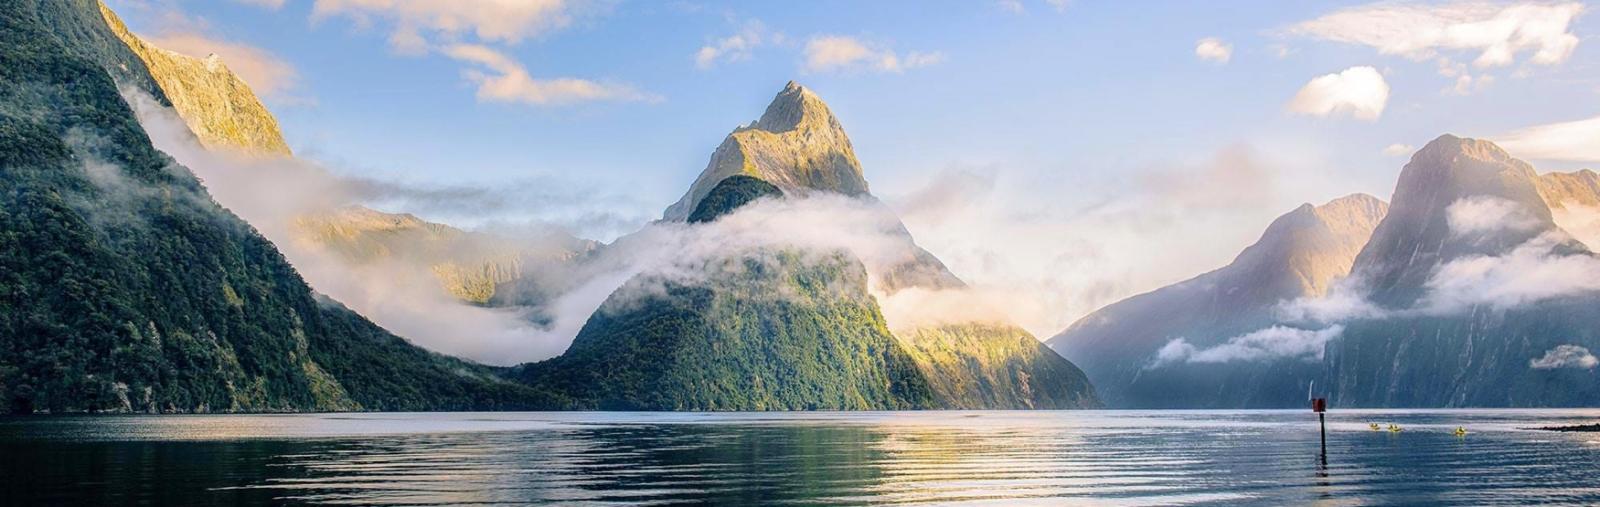 Two Week New Zealand Itineraries - The Best 14 Day Itineraries